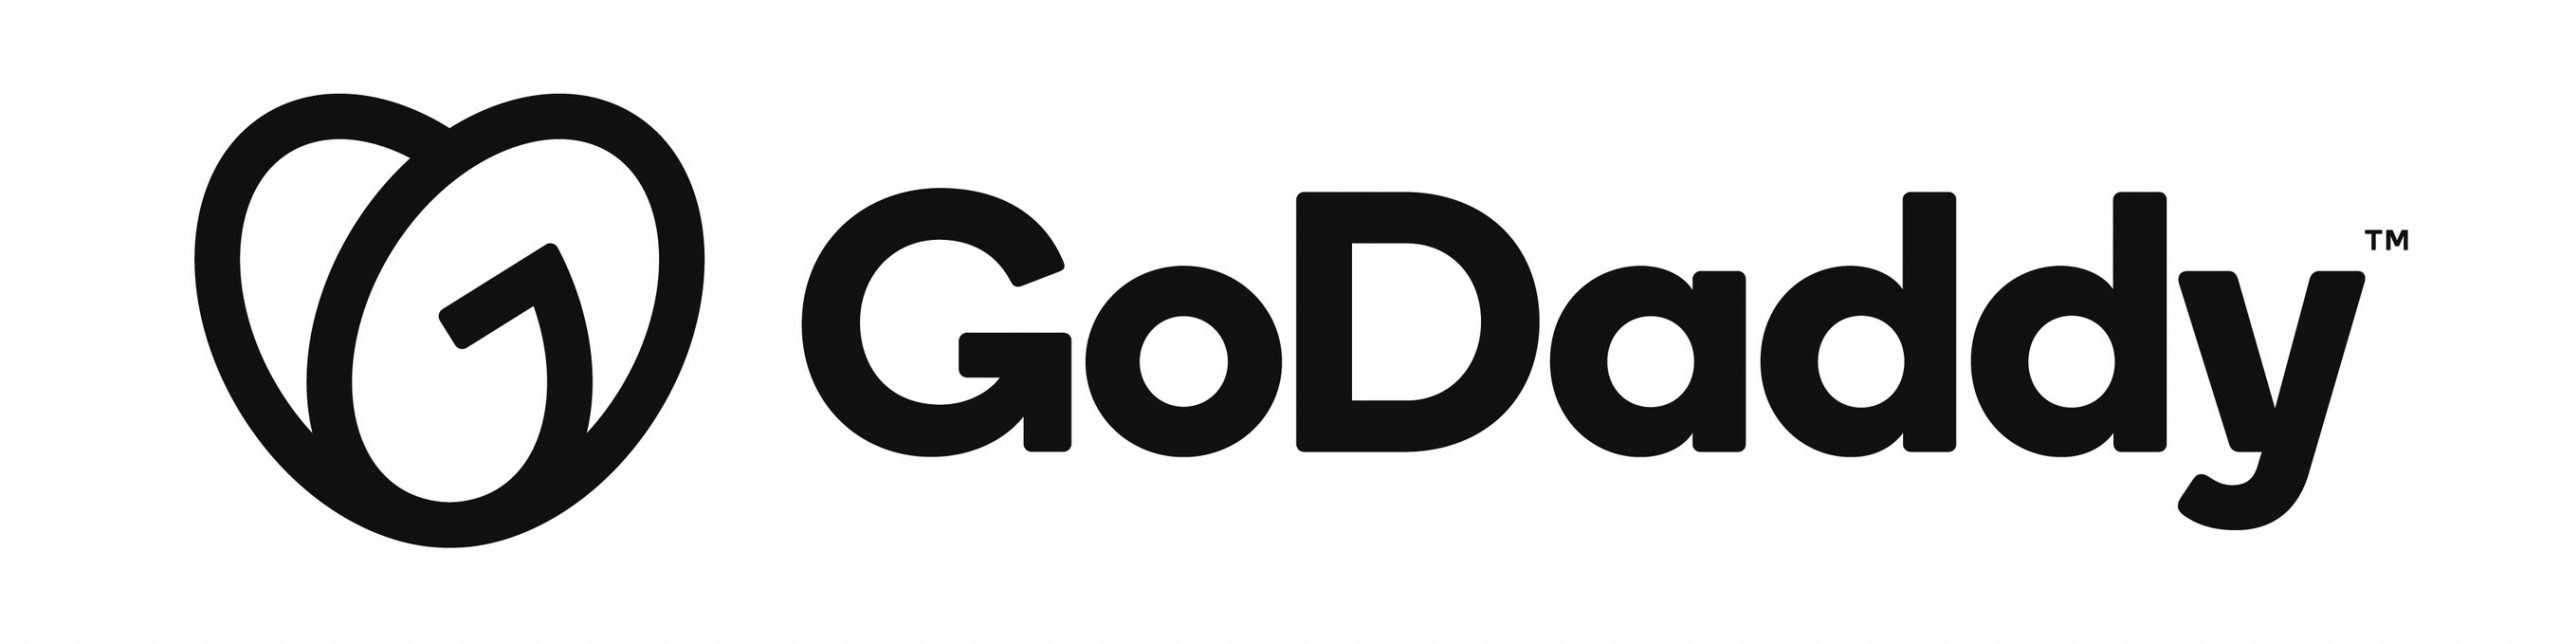 Godaddy Coupons In July 2020 99 Cents Com Domain Coupon Hosting